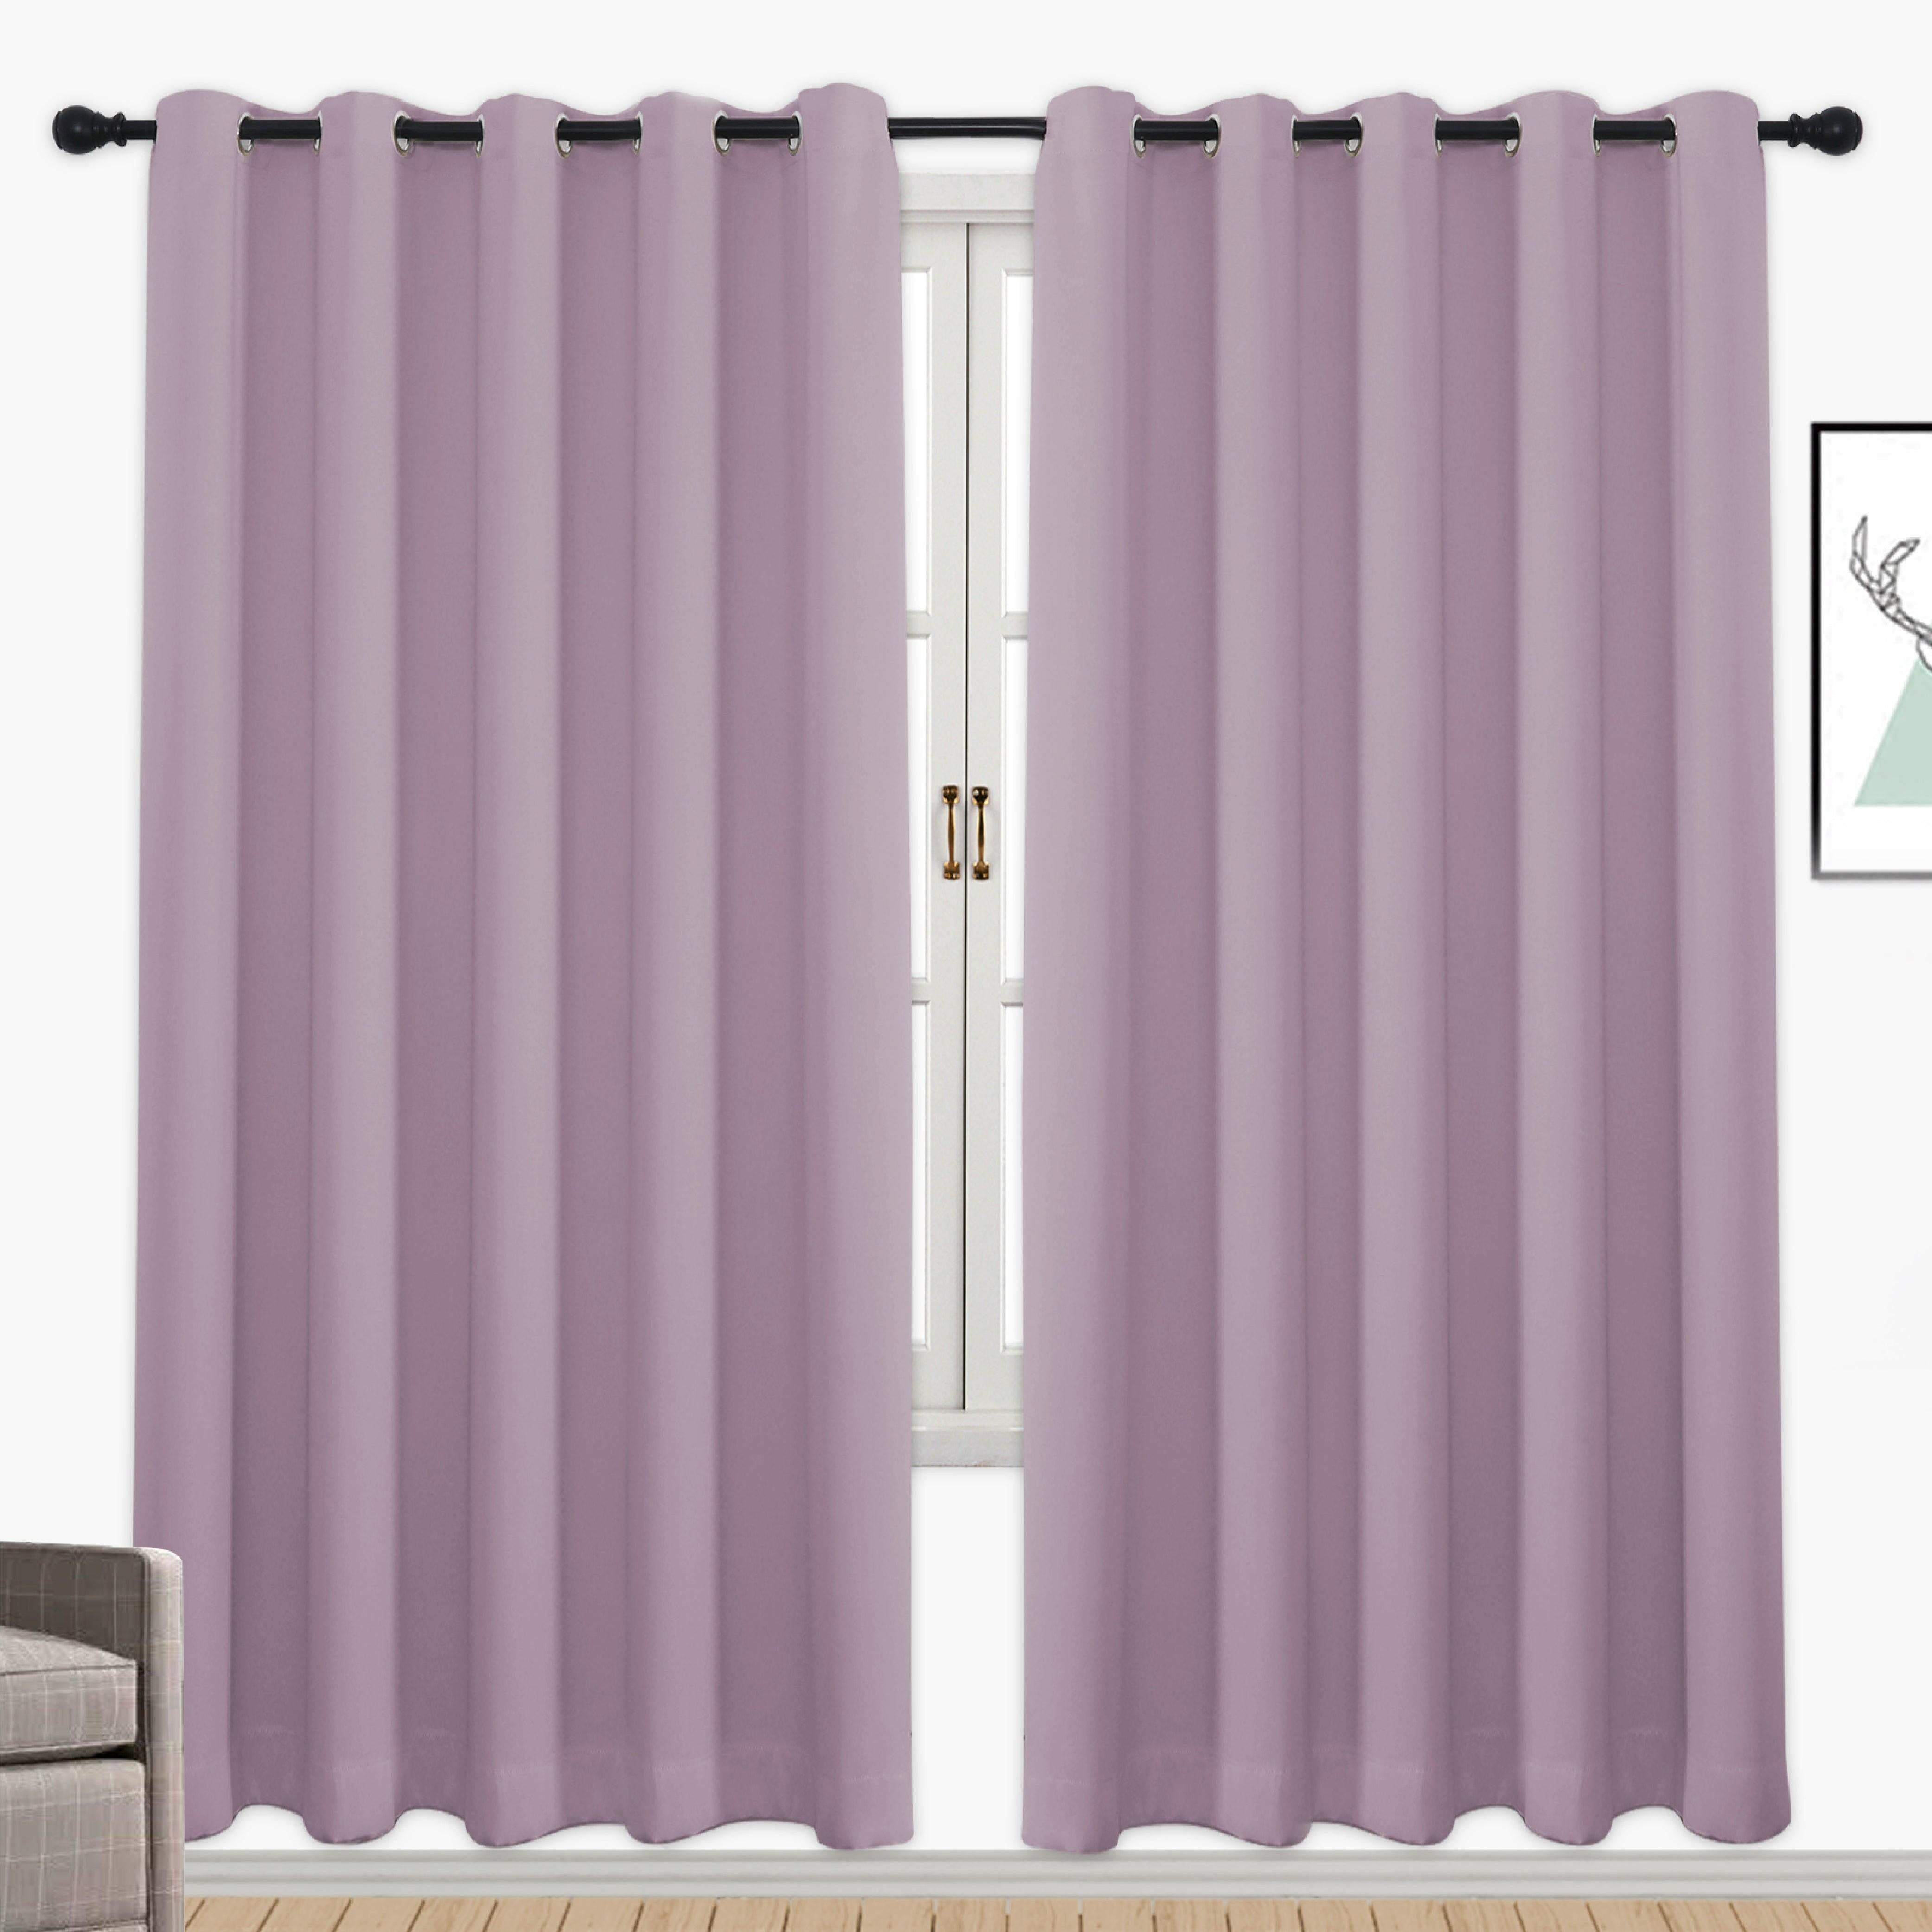 Hyper Cover 3-Layers Blockout Curtains Mauve | Window Curtains | Brilliant Home Living